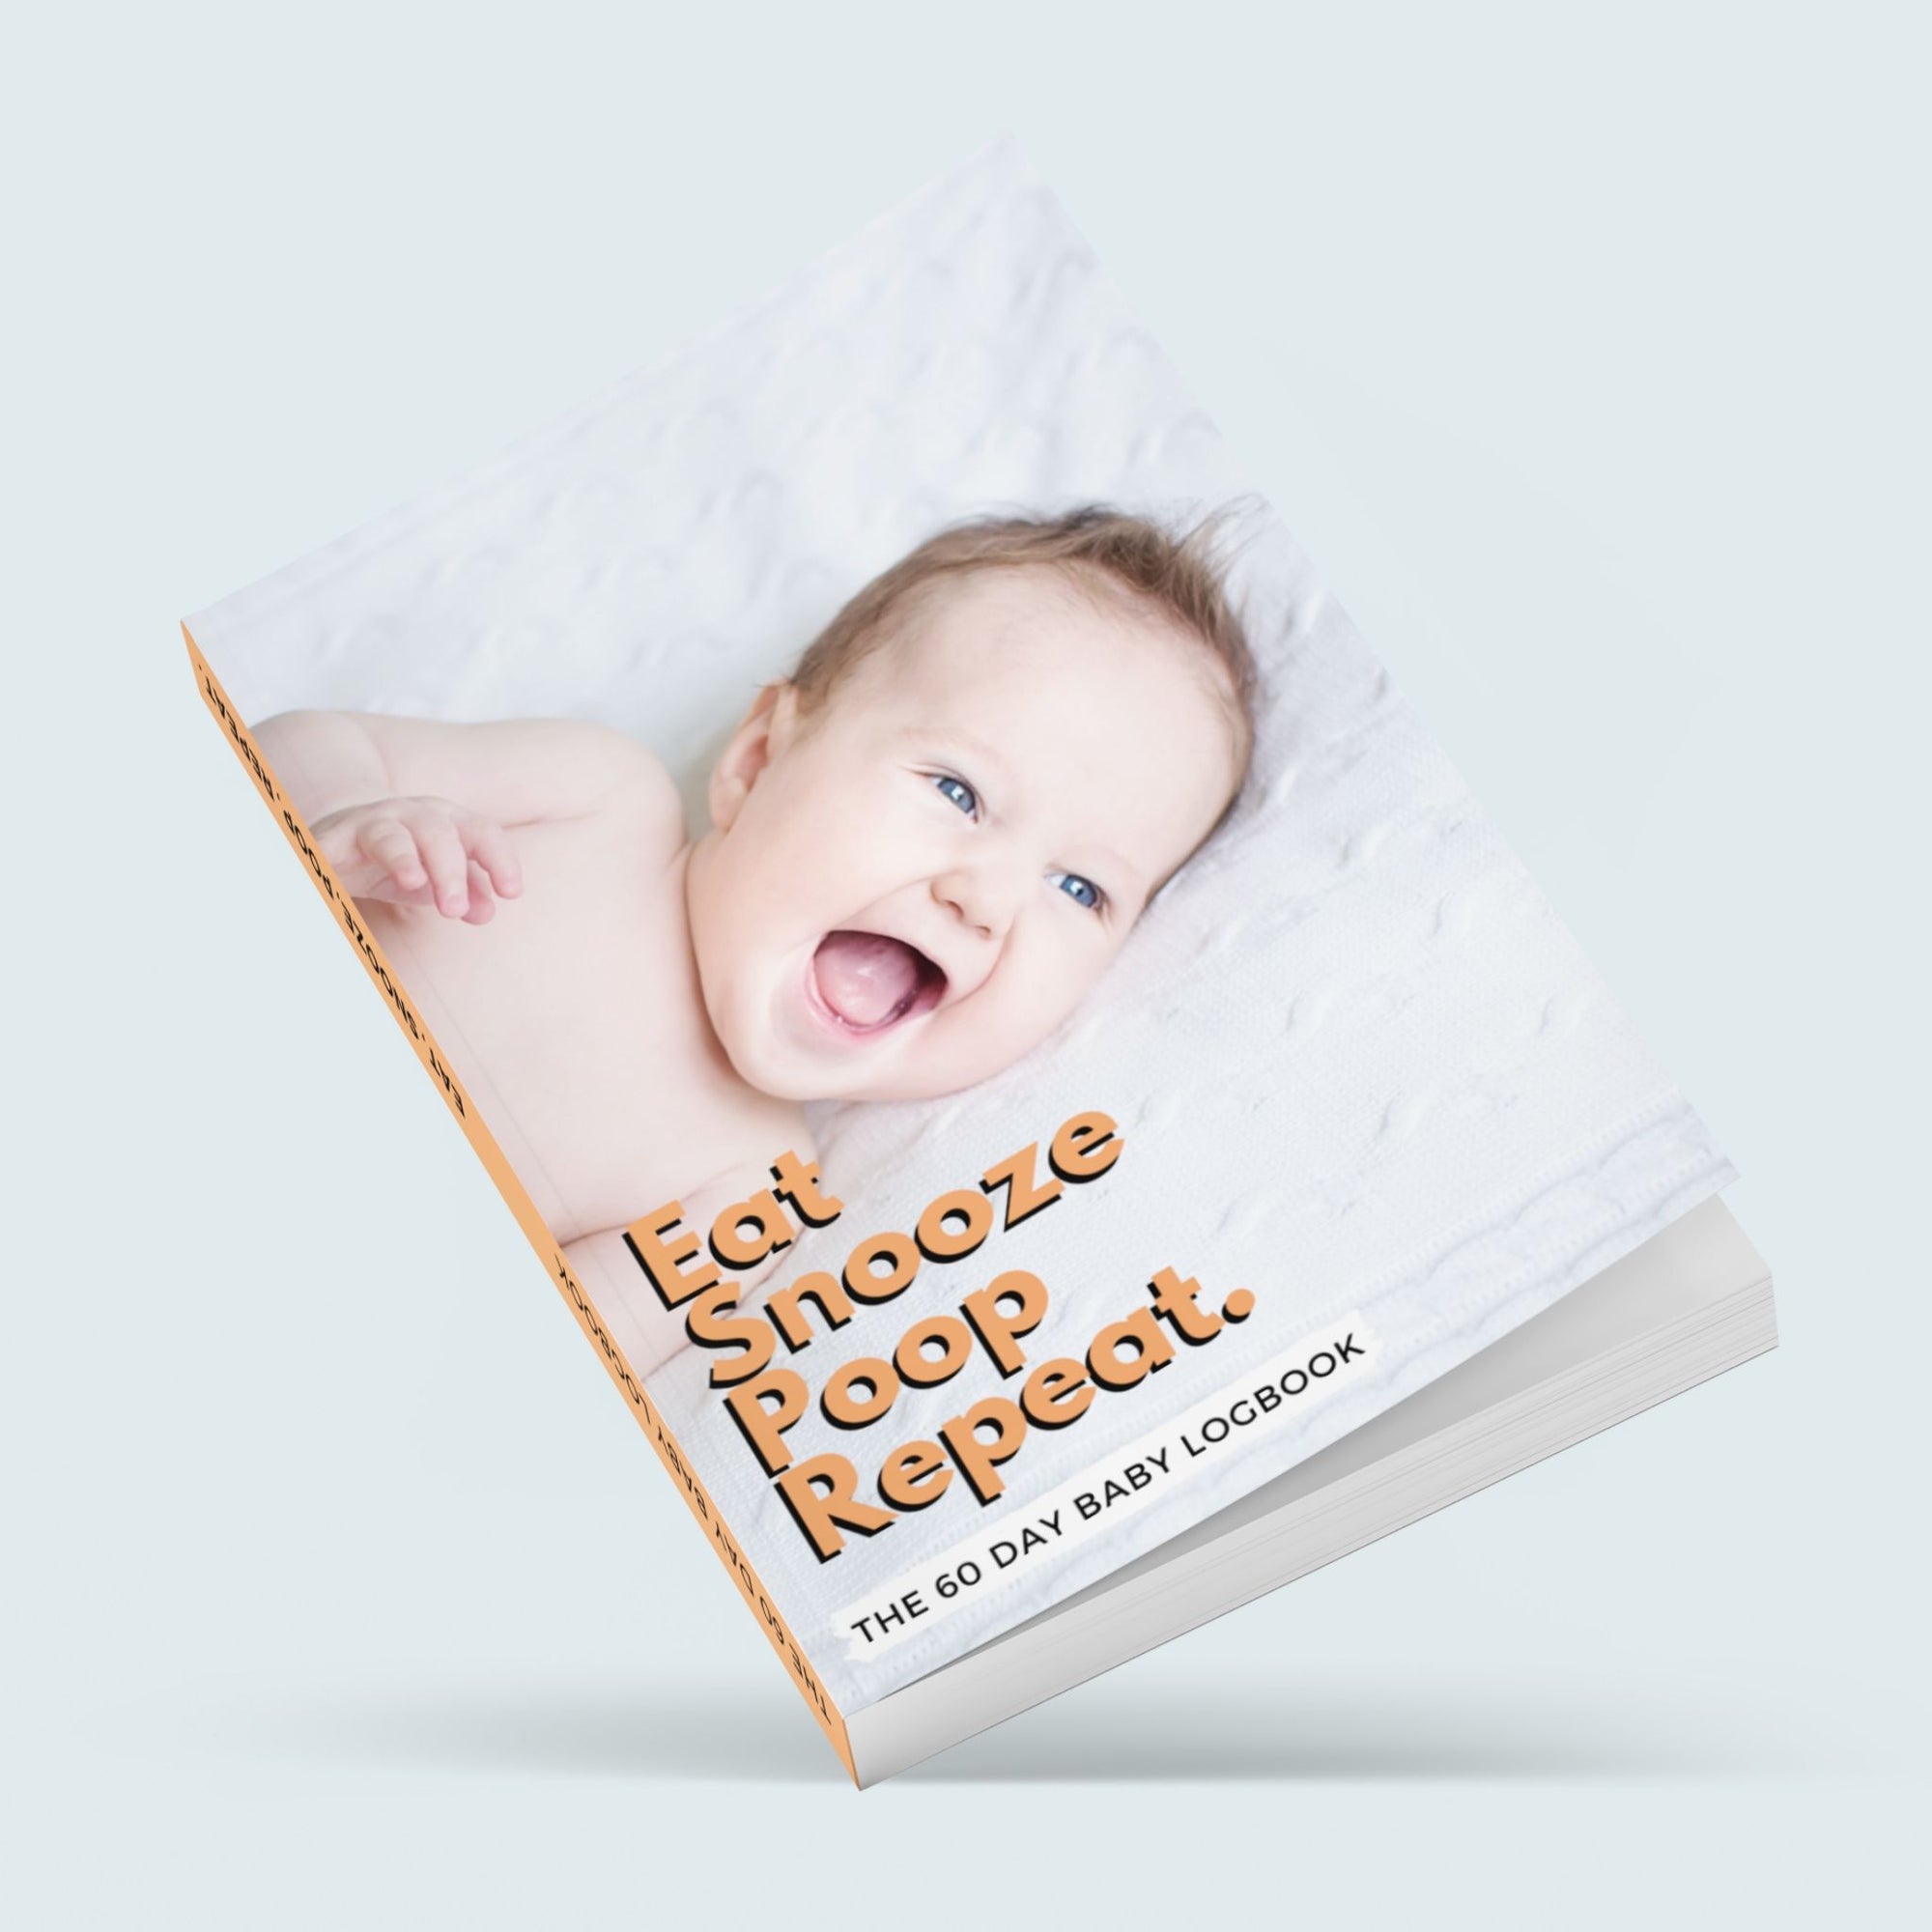 EAT, SNOOZE, POOP, REPEAT - 60 day baby sleep & food tracker, logbook, keepsake and diary 60-day or six-month baby logbook | Daily tracker for sleep schedule, feeds, health and milestones  Media